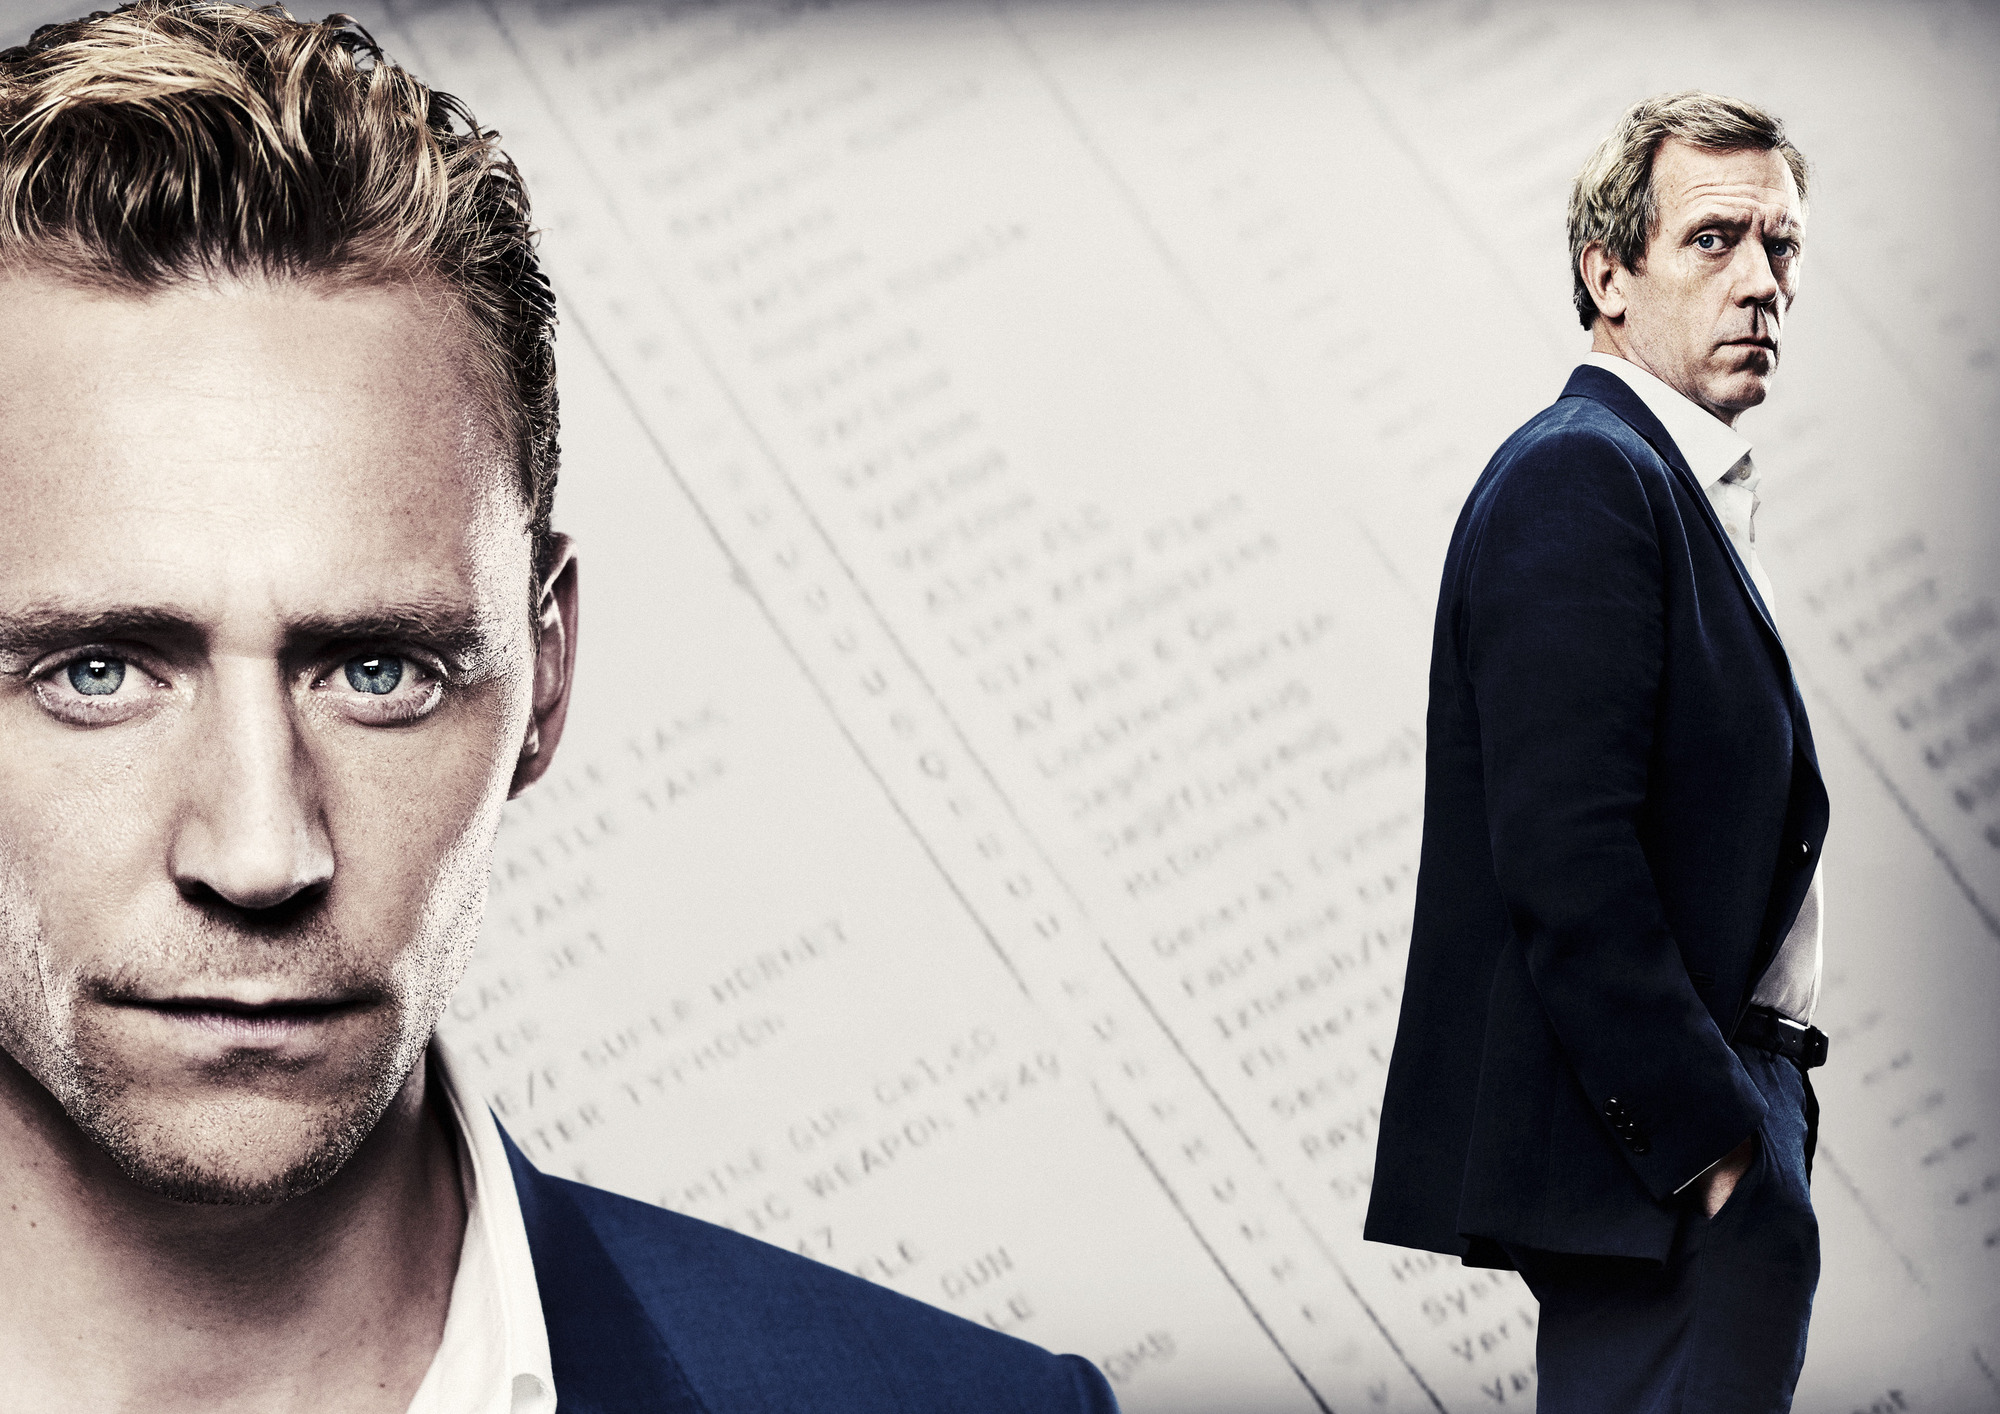 The Night Manager Starring Tom Hiddleston and Hugh Laurie New Poster Released | The ...2000 x 1414